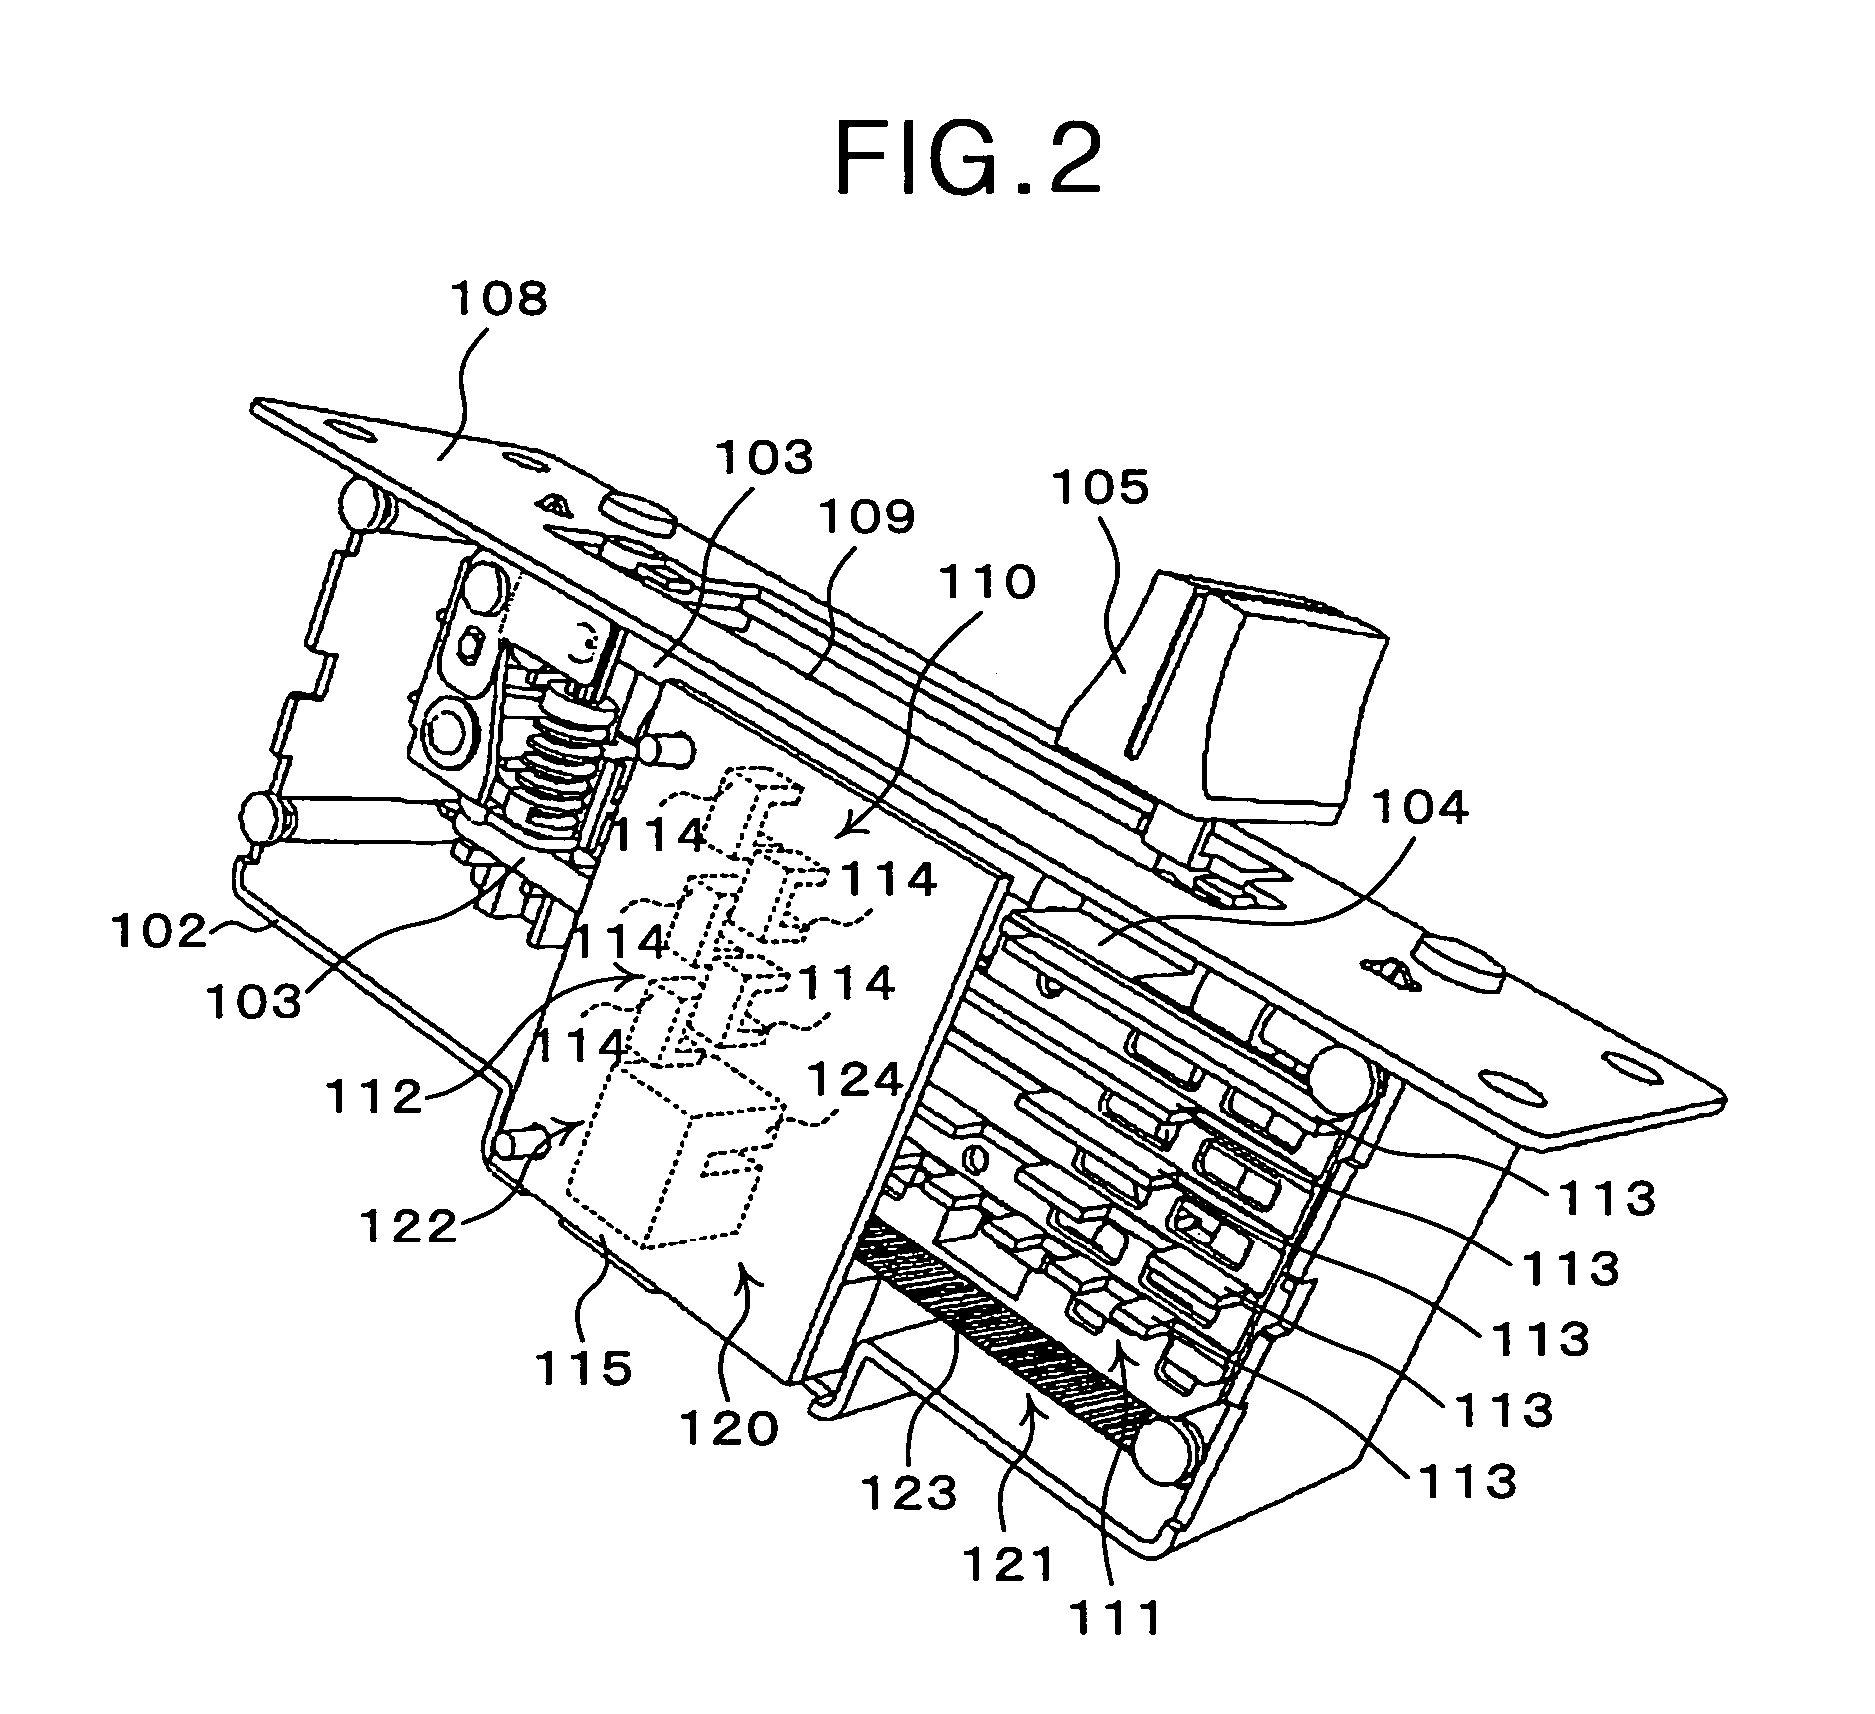 Apparatus for adjusting a signal and prohibiting adjustment of the signal based on a position of a movable member